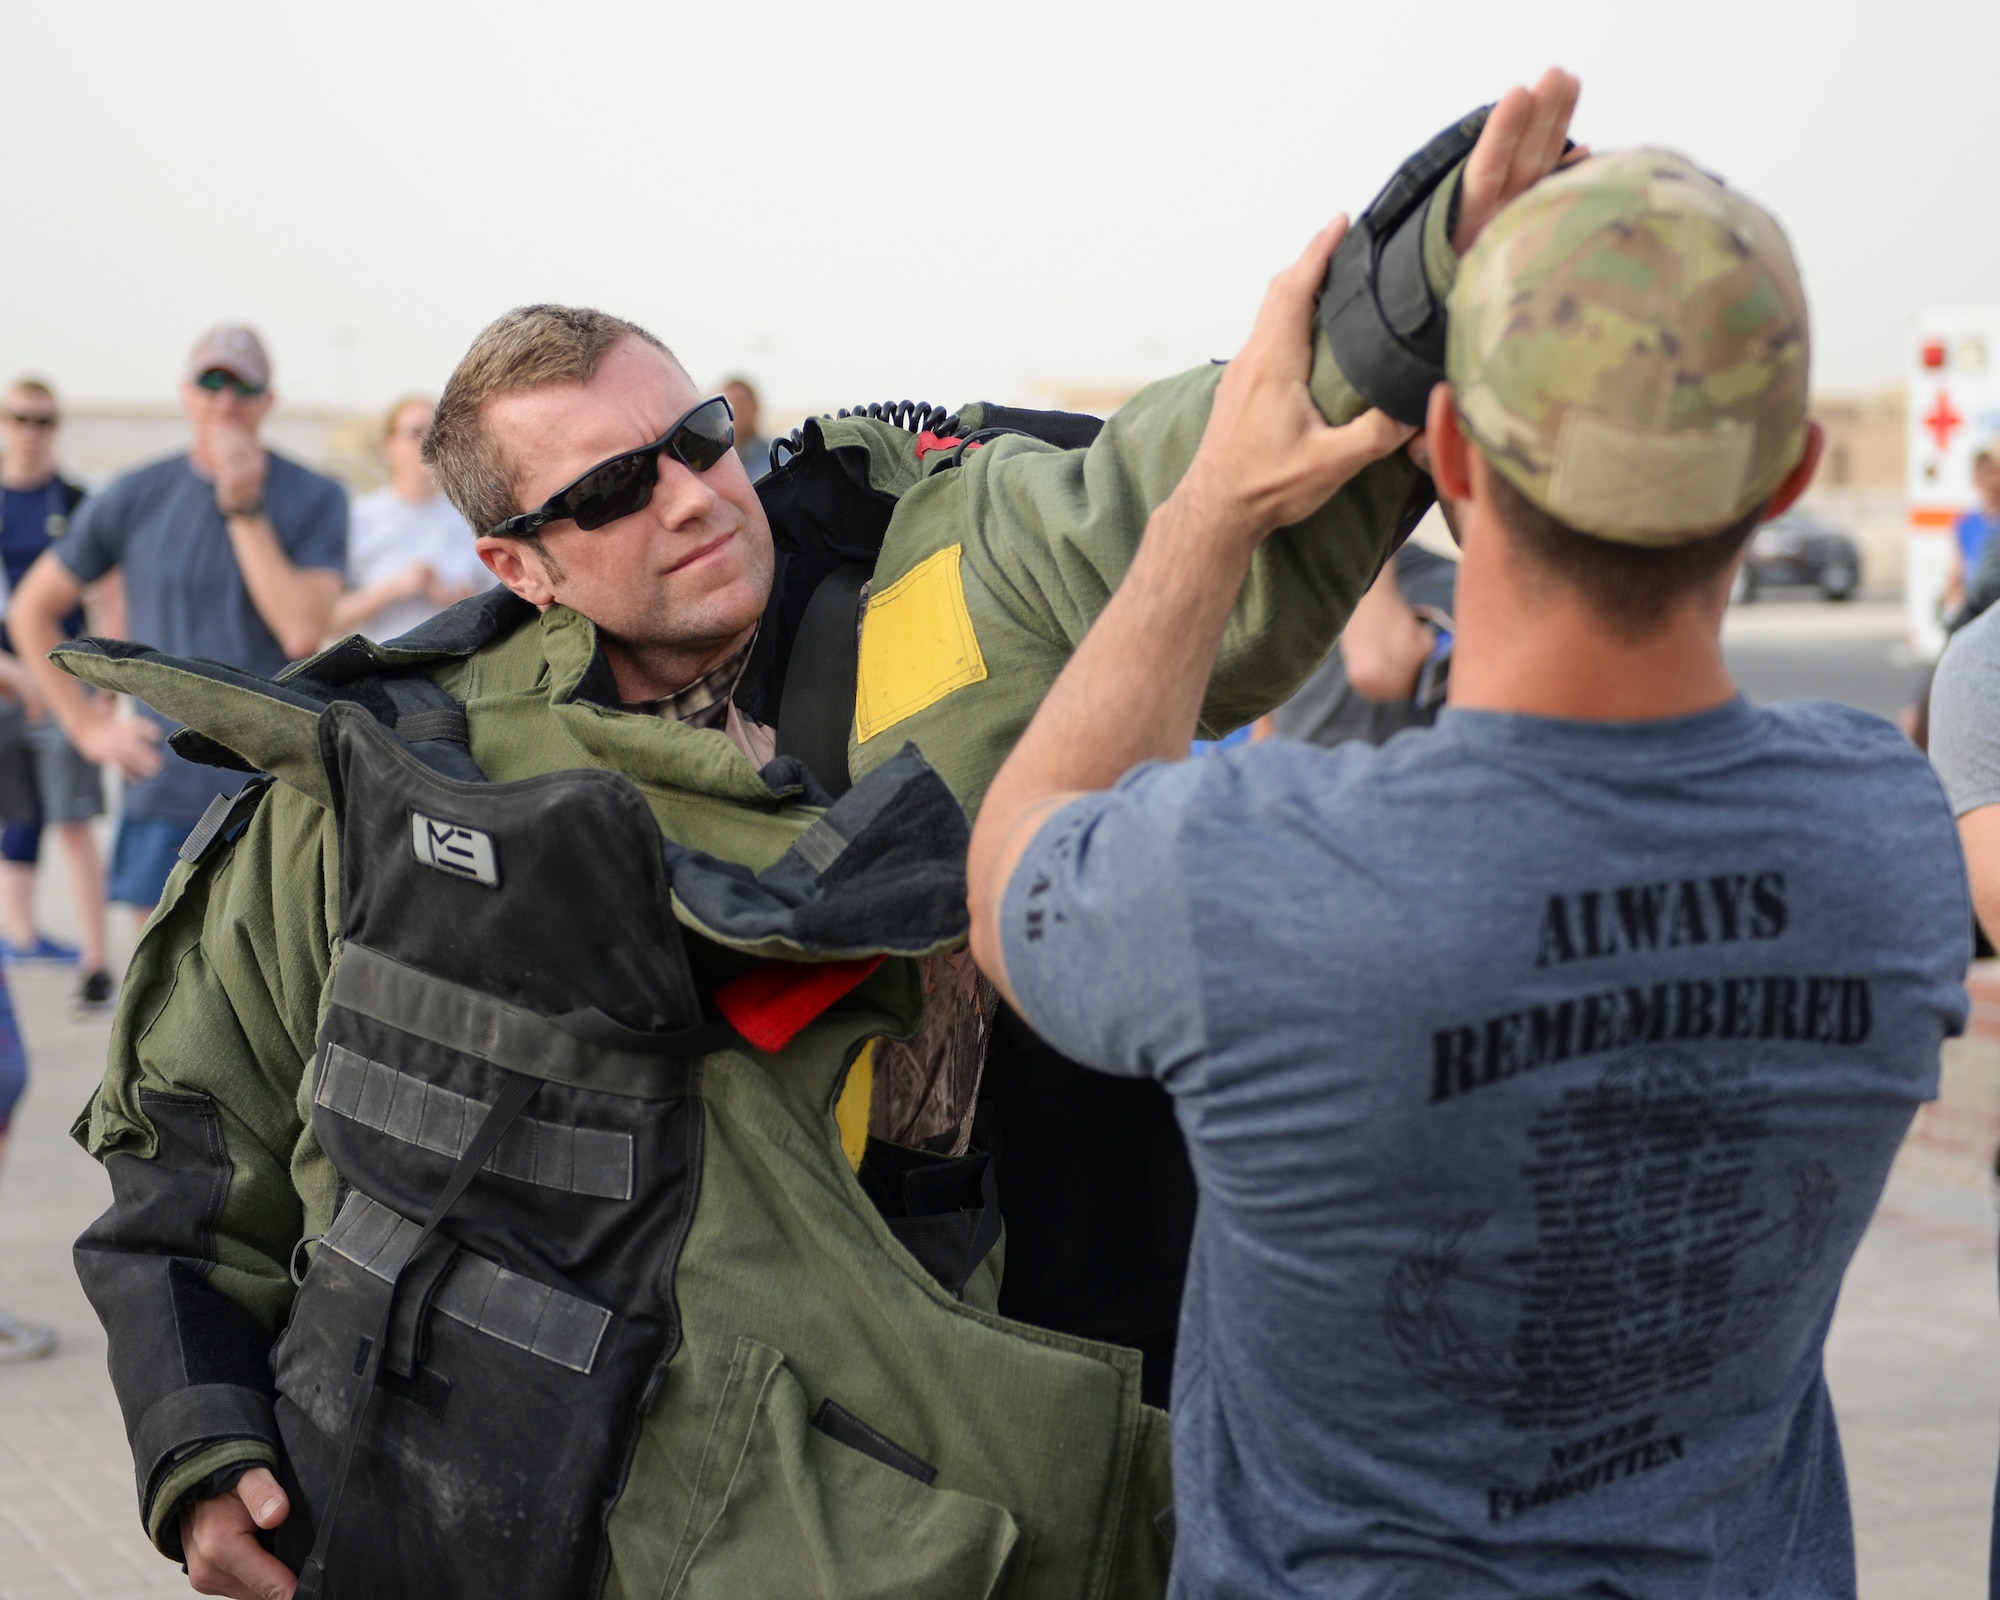 U.S. Air Force Staff Sgt. Jason Evans, explosive ordinance disposal technician, assigned to the 379th Civil Engineering Squadron, gets help donning the bomb suit he will wear during the annual EOD 5K Memorial Run at Al Udeid Air Base, Qatar, June 3, 2017. Evans joined service members from across the base who gathered to take part in the EOD 5K Memorial Run in memory of the EOD men and women killed in action during combat operations. (U.S. Air Force photo by Tech. Sgt. Bradly A. Schneider/Released)